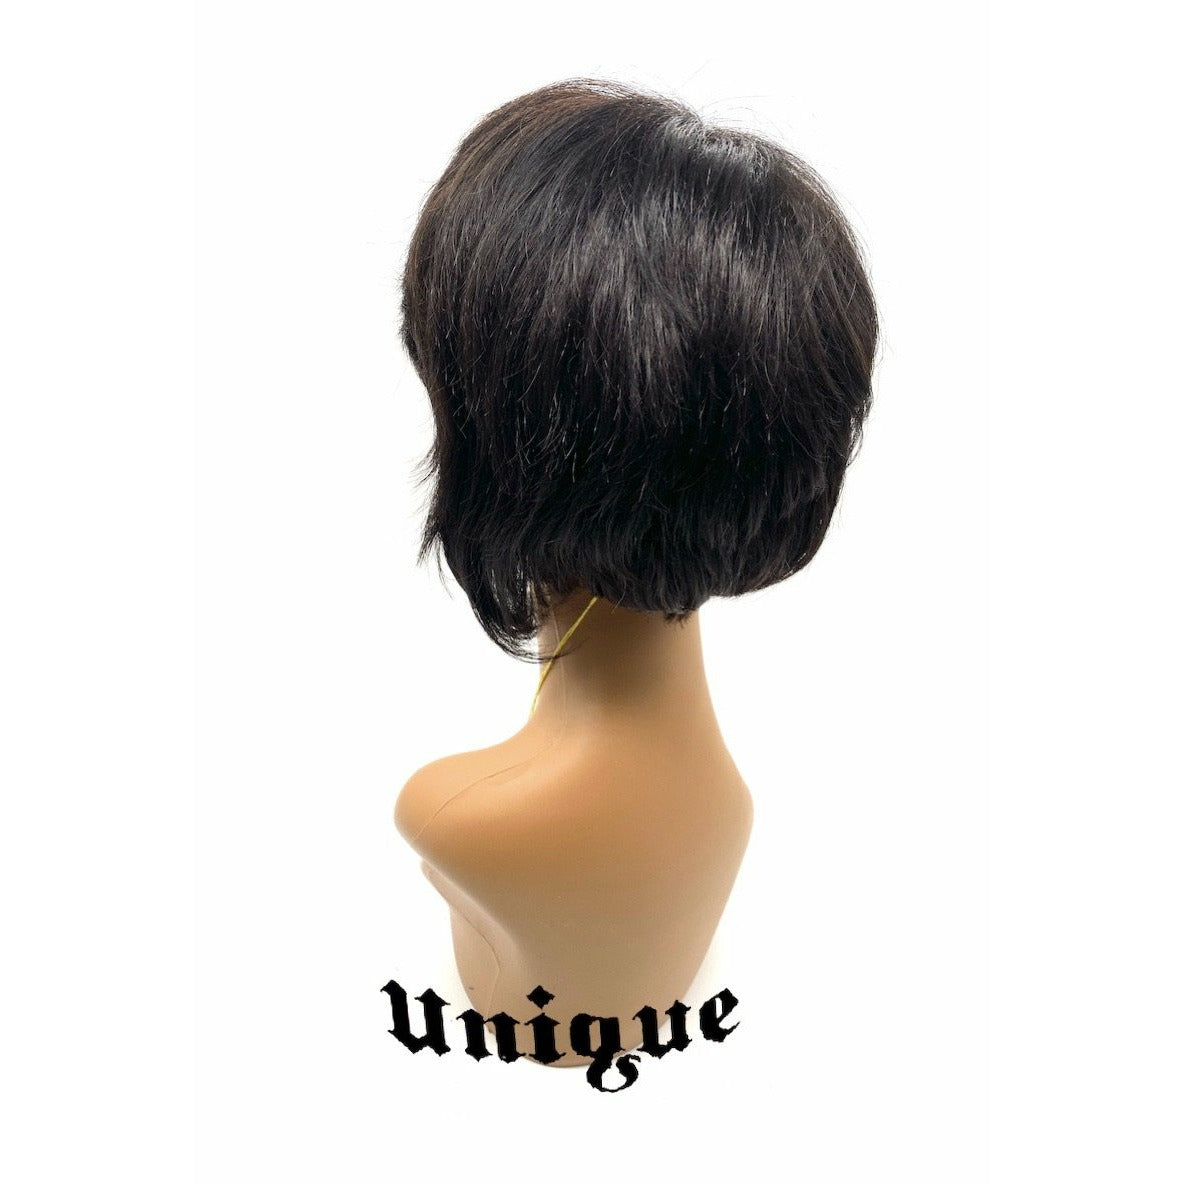 Unique 100% Human Hair Full Wig/Style Style A9